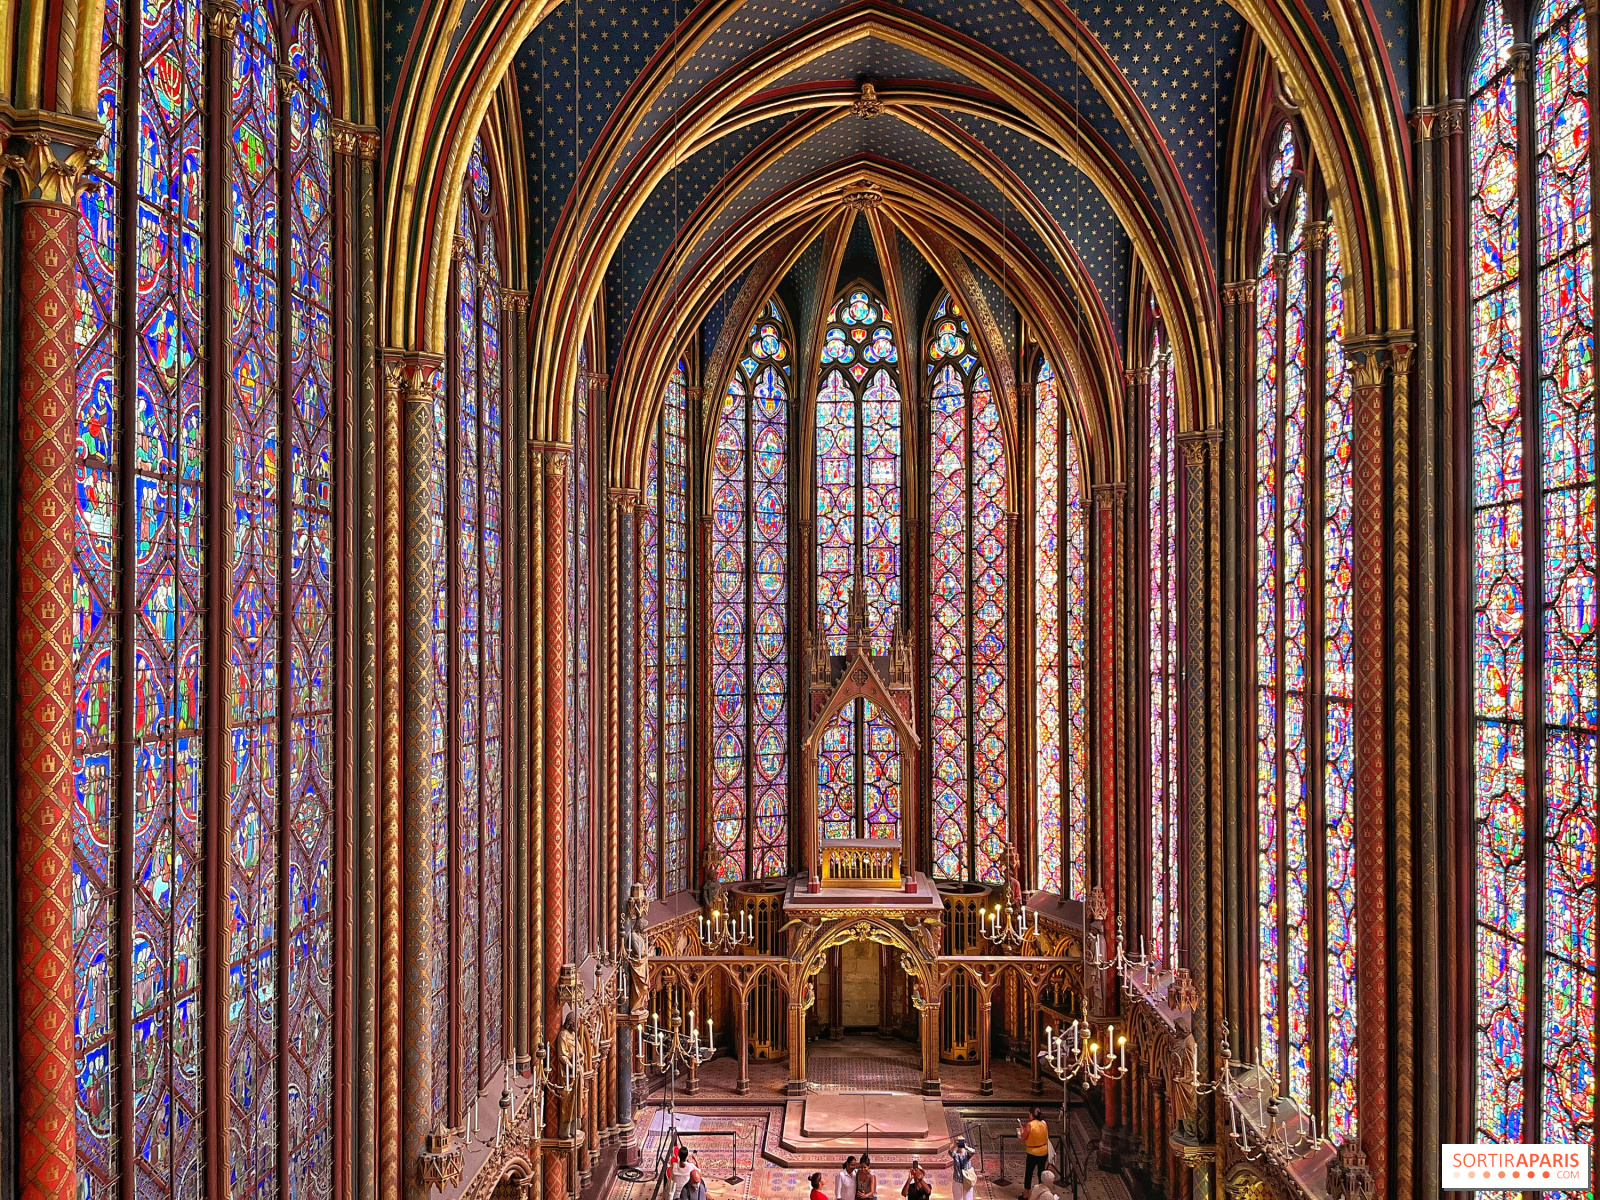 The Dazzling Stained Glass Windows of Sainte-Chapelle - Paris Perfect